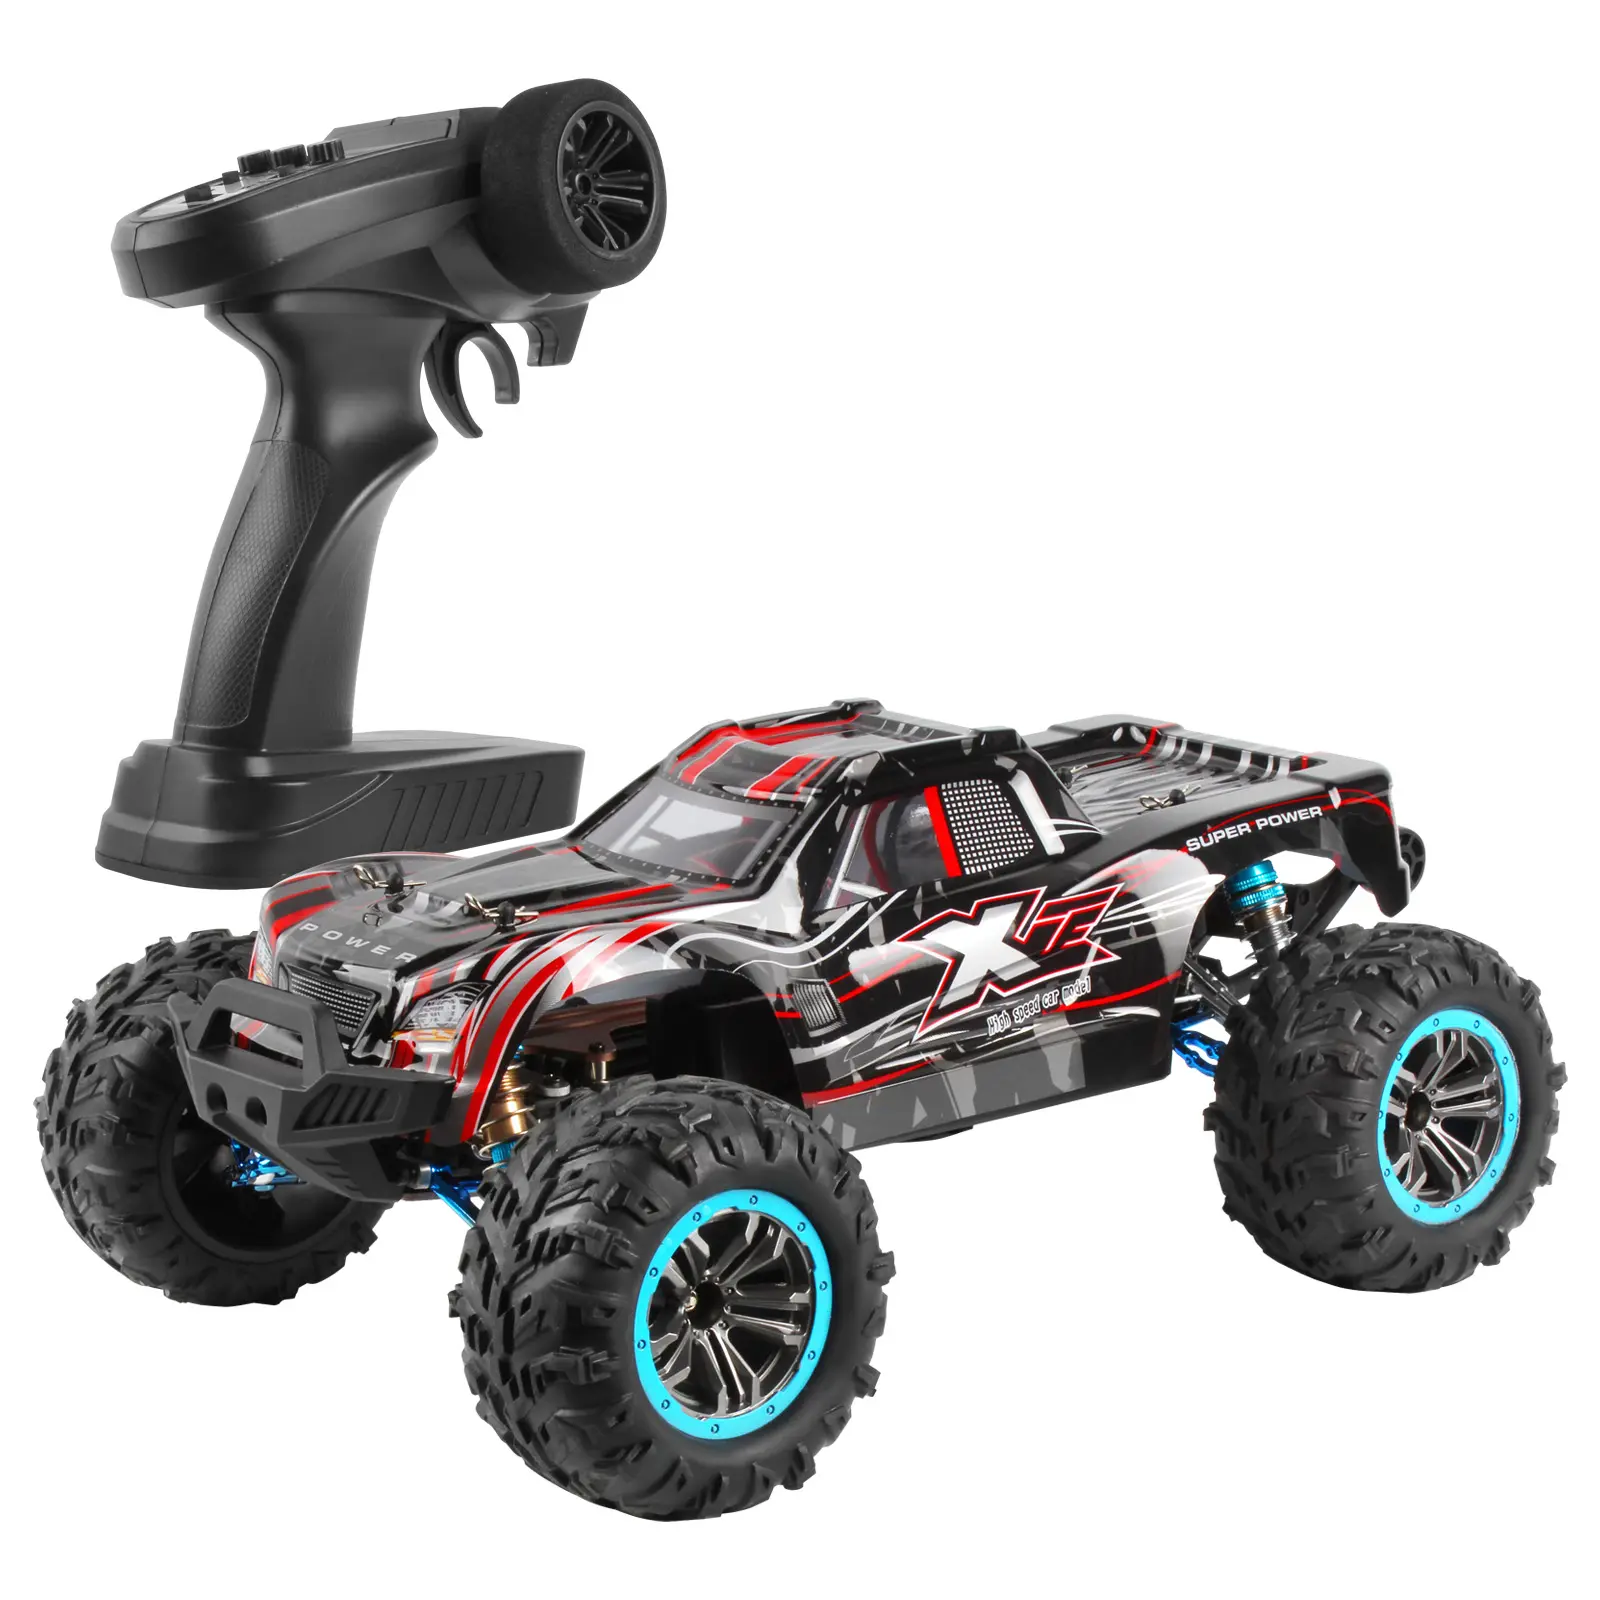 High-end Metal Site Brushless Remote Control High speed Car Monster Truck Up To 100 Km/h Support 4S Battery